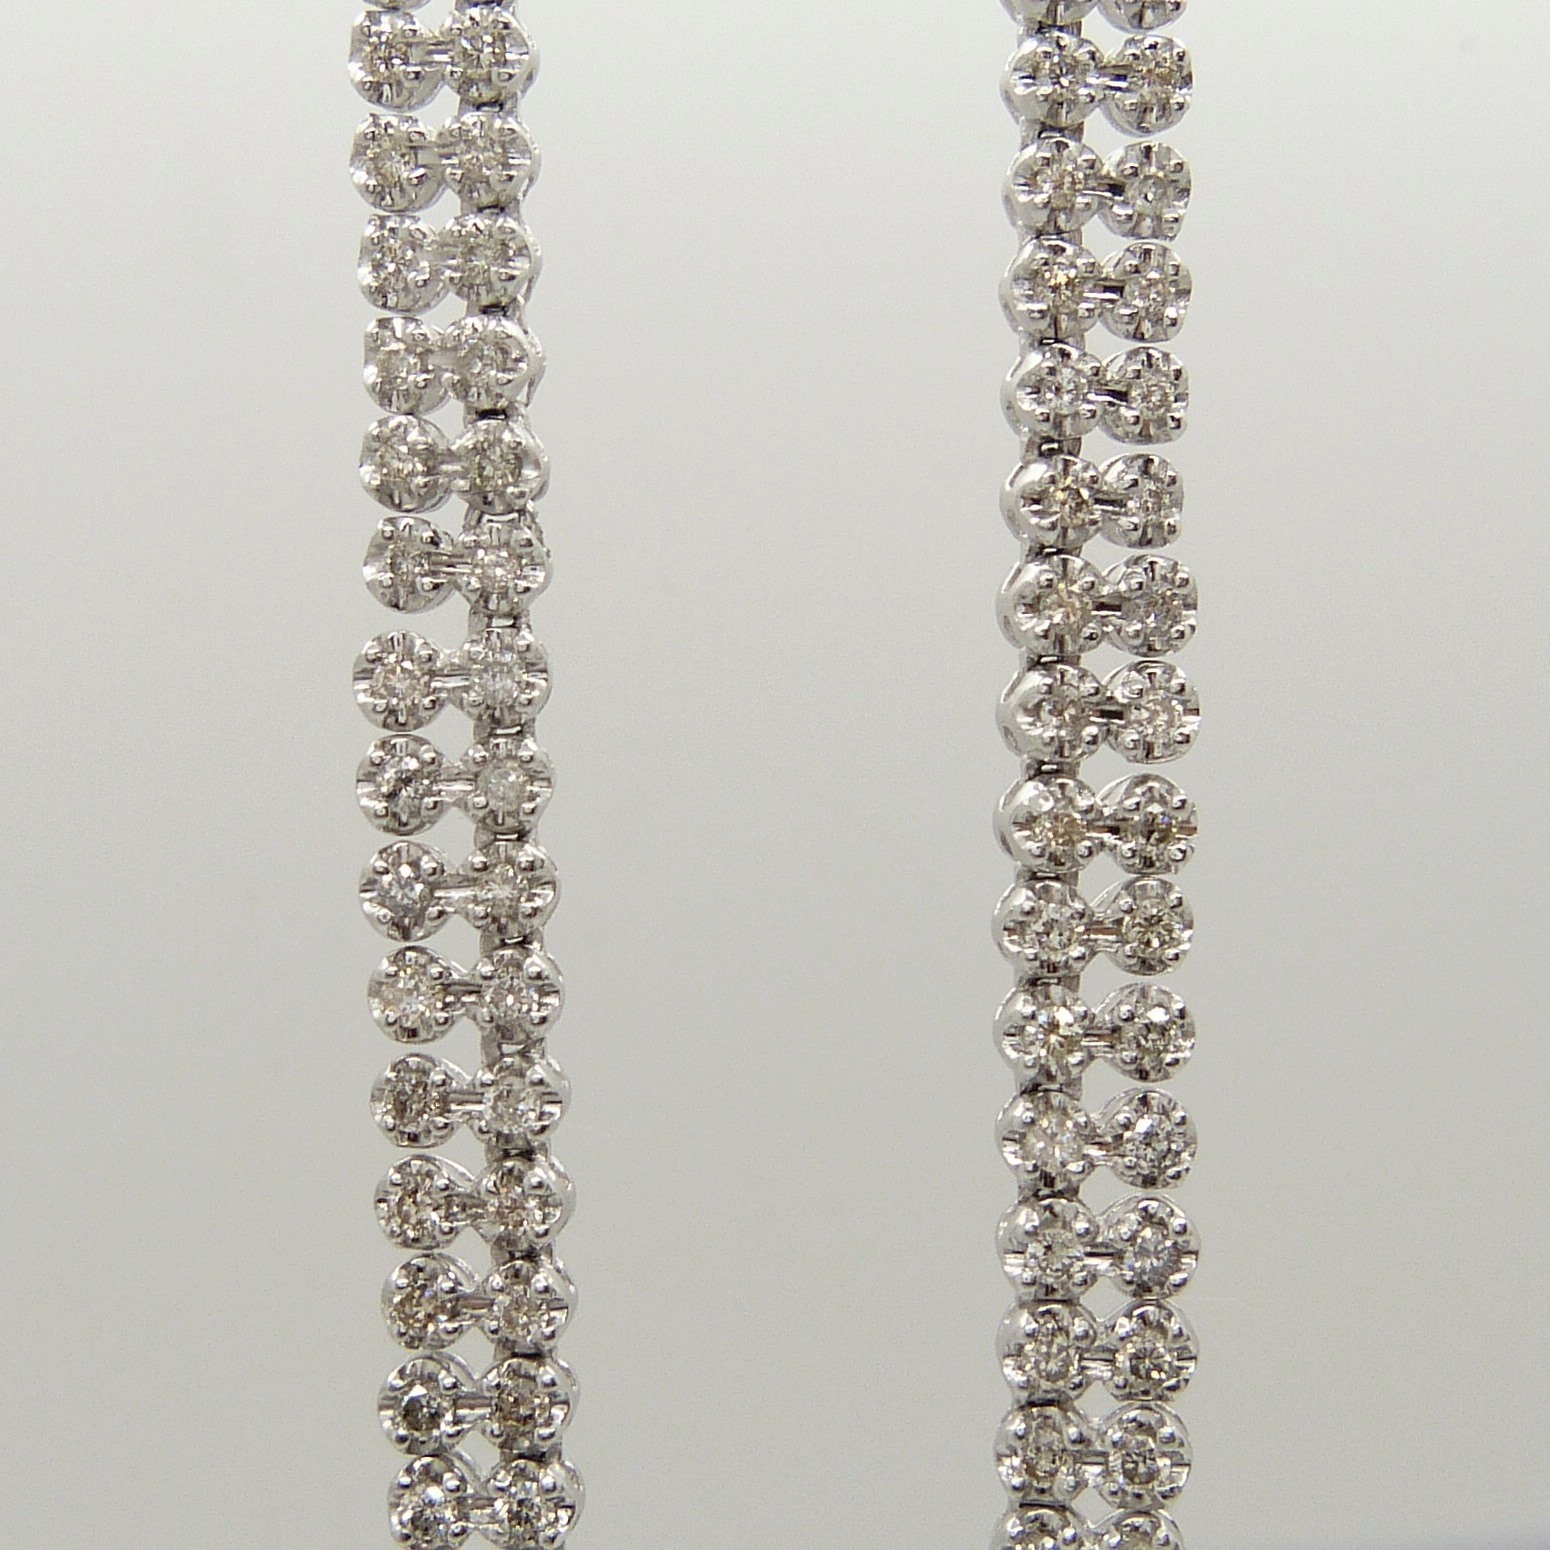 A superb, weighty 5.08 carat diamond Riviere double droplet-style necklace in platinum, boxed - Image 7 of 11